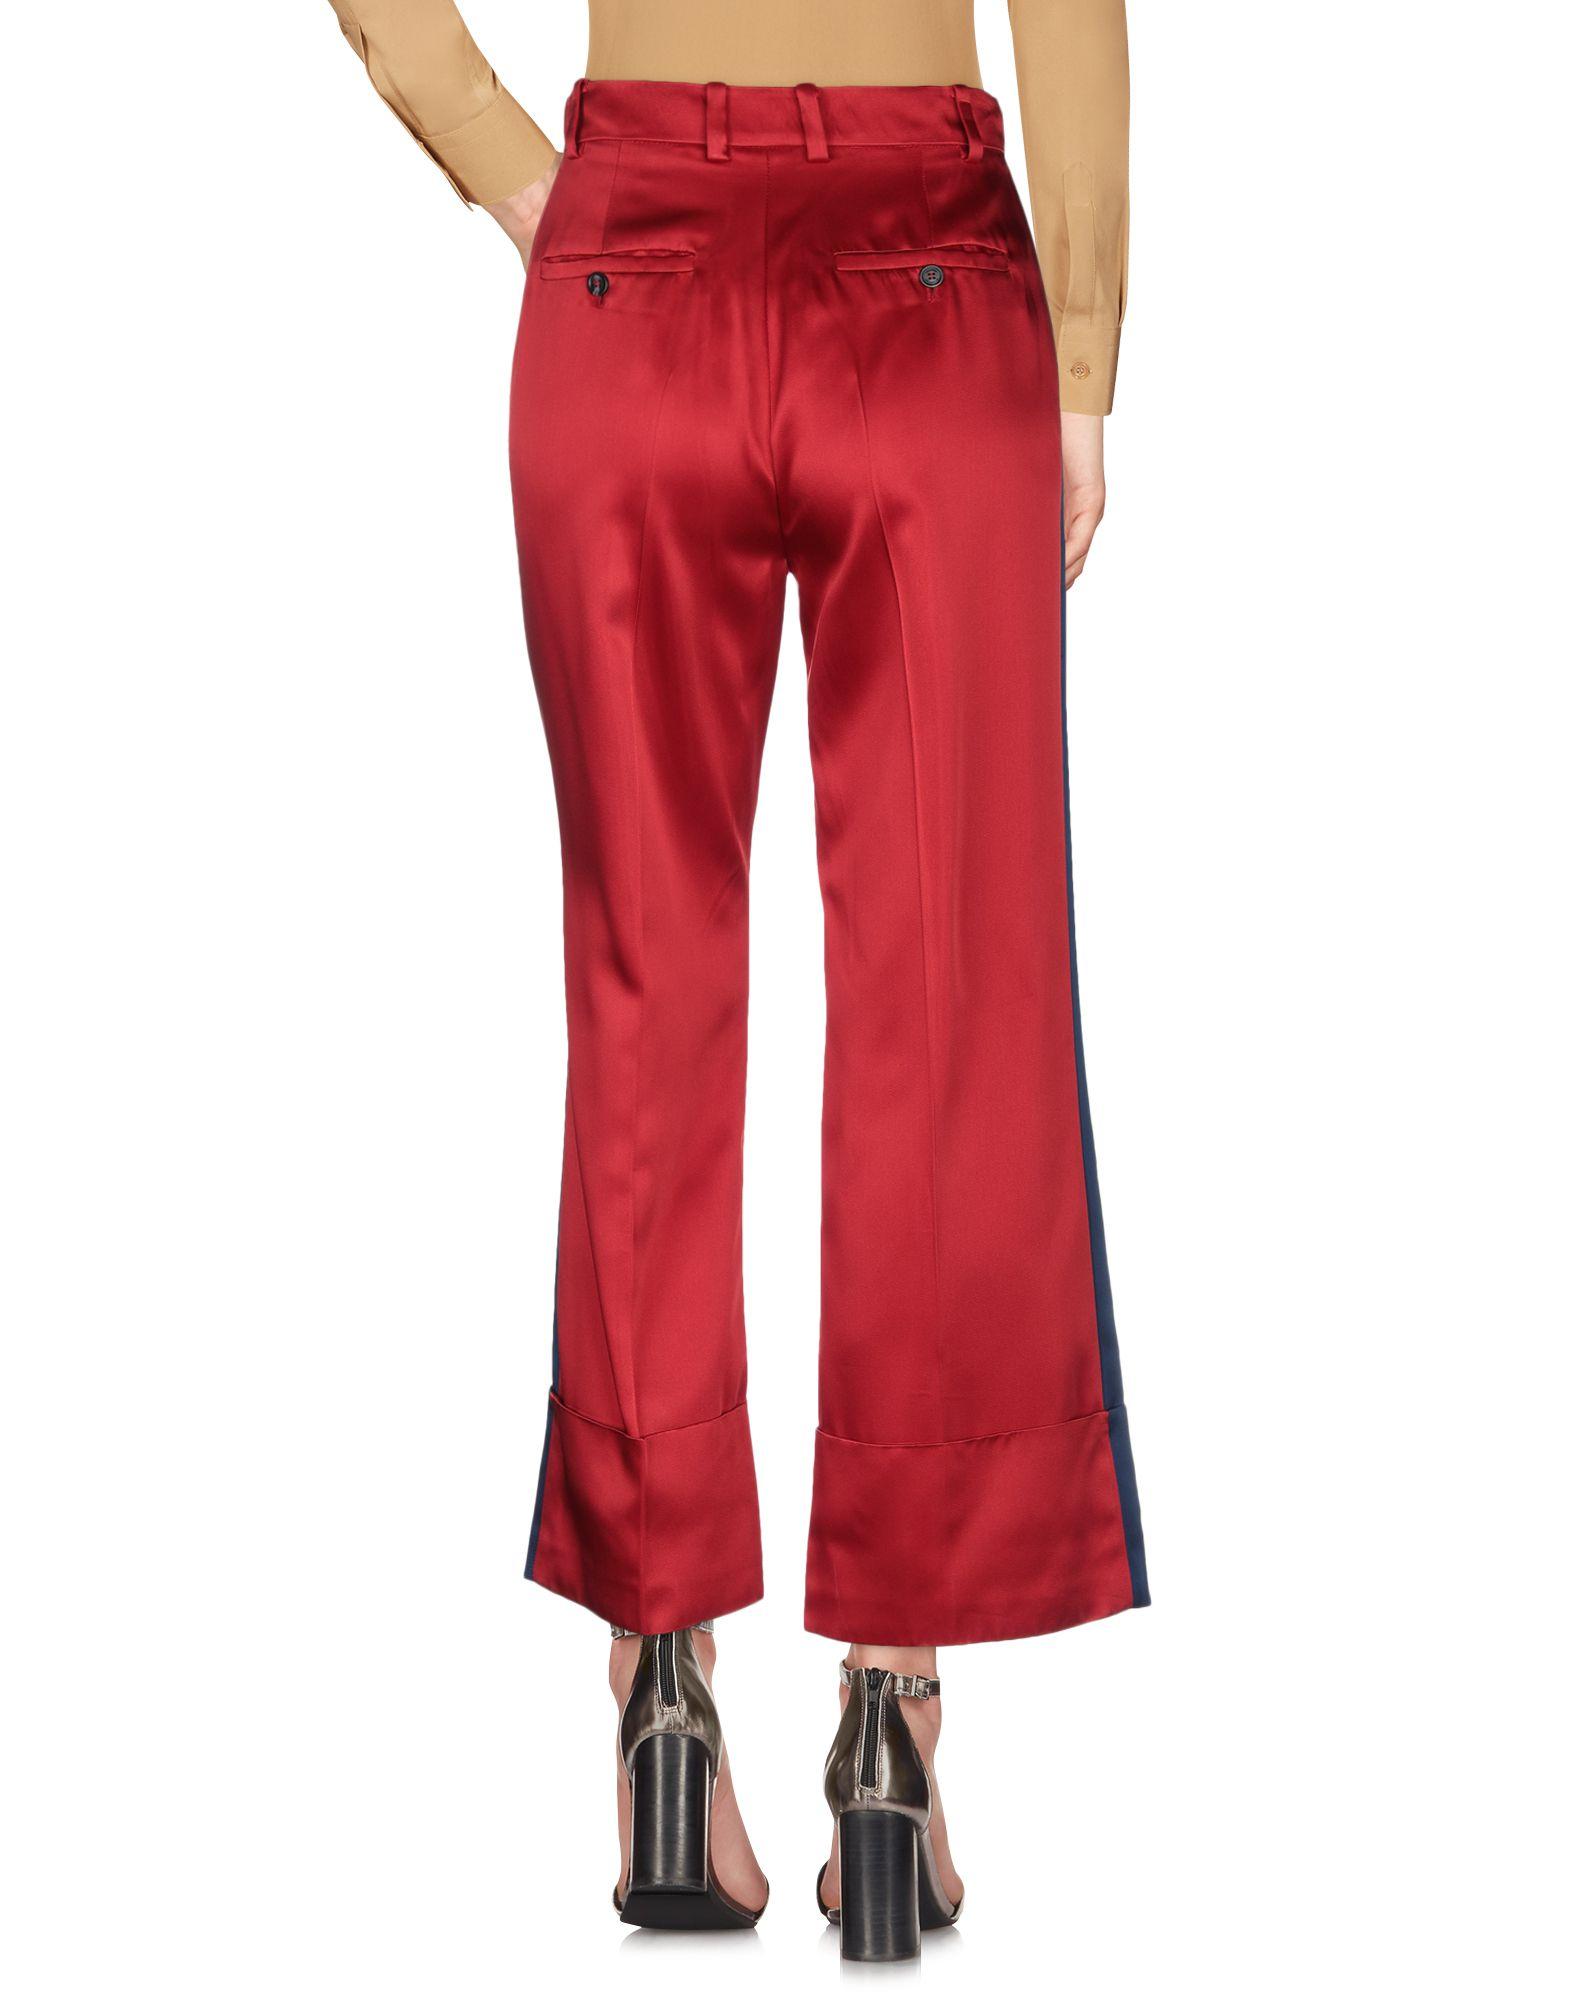 Tommy Hilfiger Satin Pants in Red - Lyst